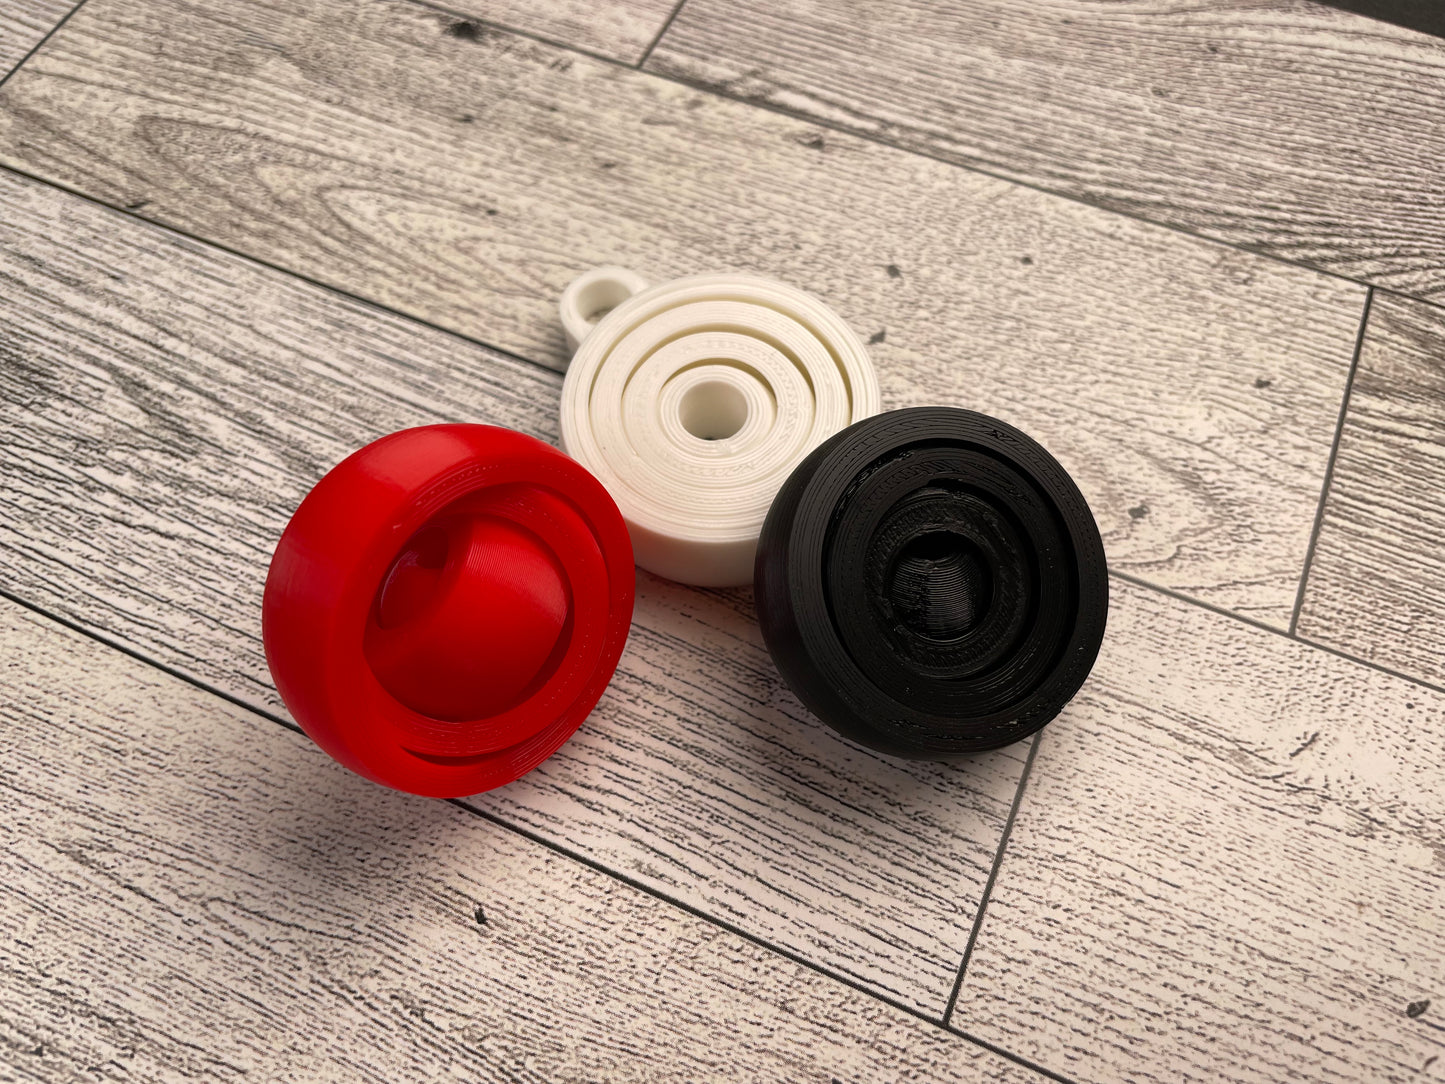 Three small (about 1.5 inches in diameter) 3D printed gyro fidgets on a wood background. Each fidget has four nested circles that can be spun and twirled. The fidgets are printed in red, white and black filament. The white fidget has a keyhole for attaching it to a keychain.